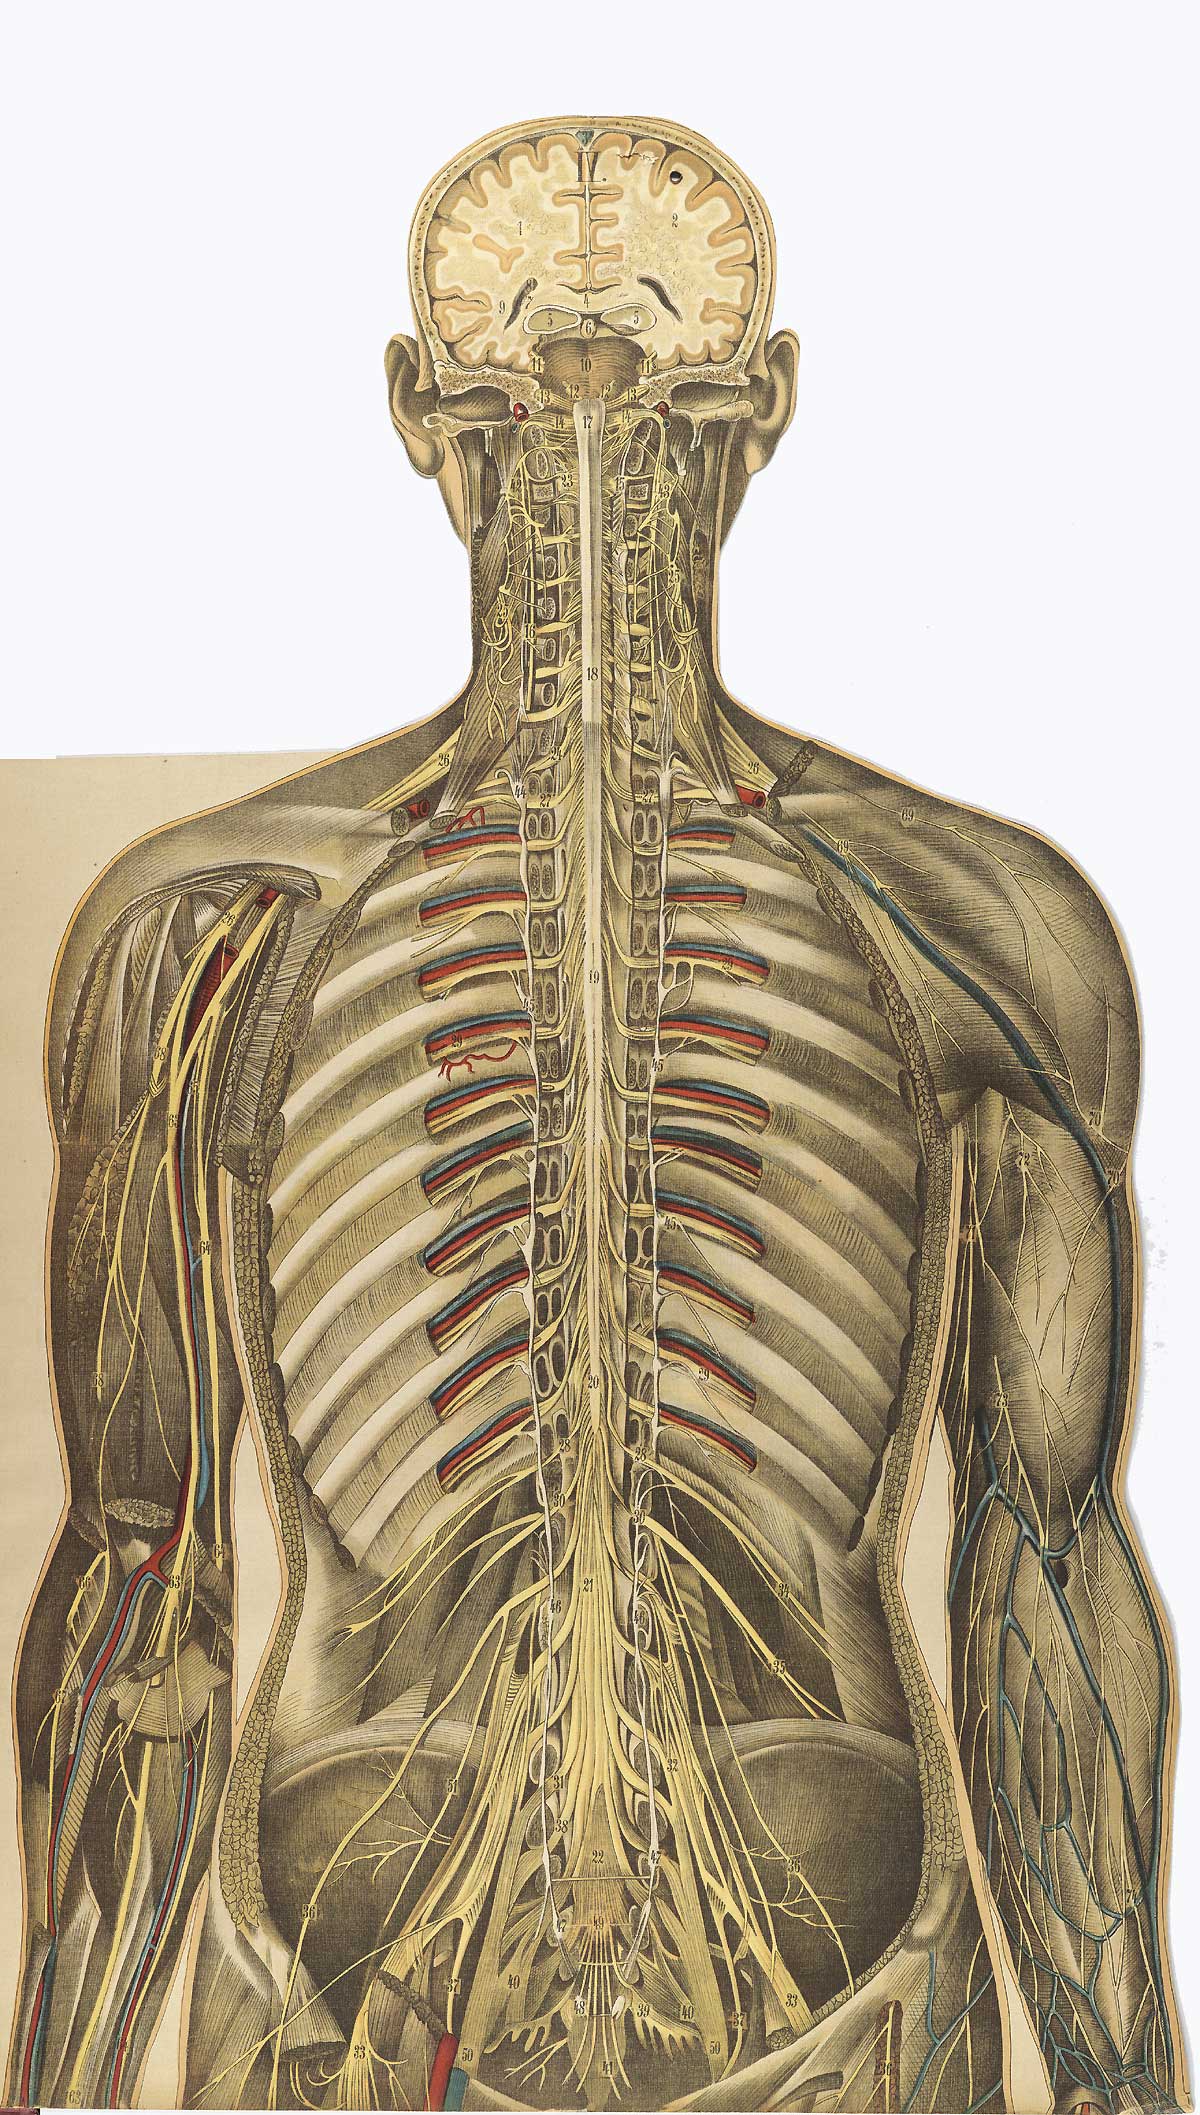 Chromolithograph showing the arterial and venous of the upper half of the back of the human body, from Julien Bouglé’s Le corps humain en grandeur naturelle, NLM Call no. WE B758c 1899.